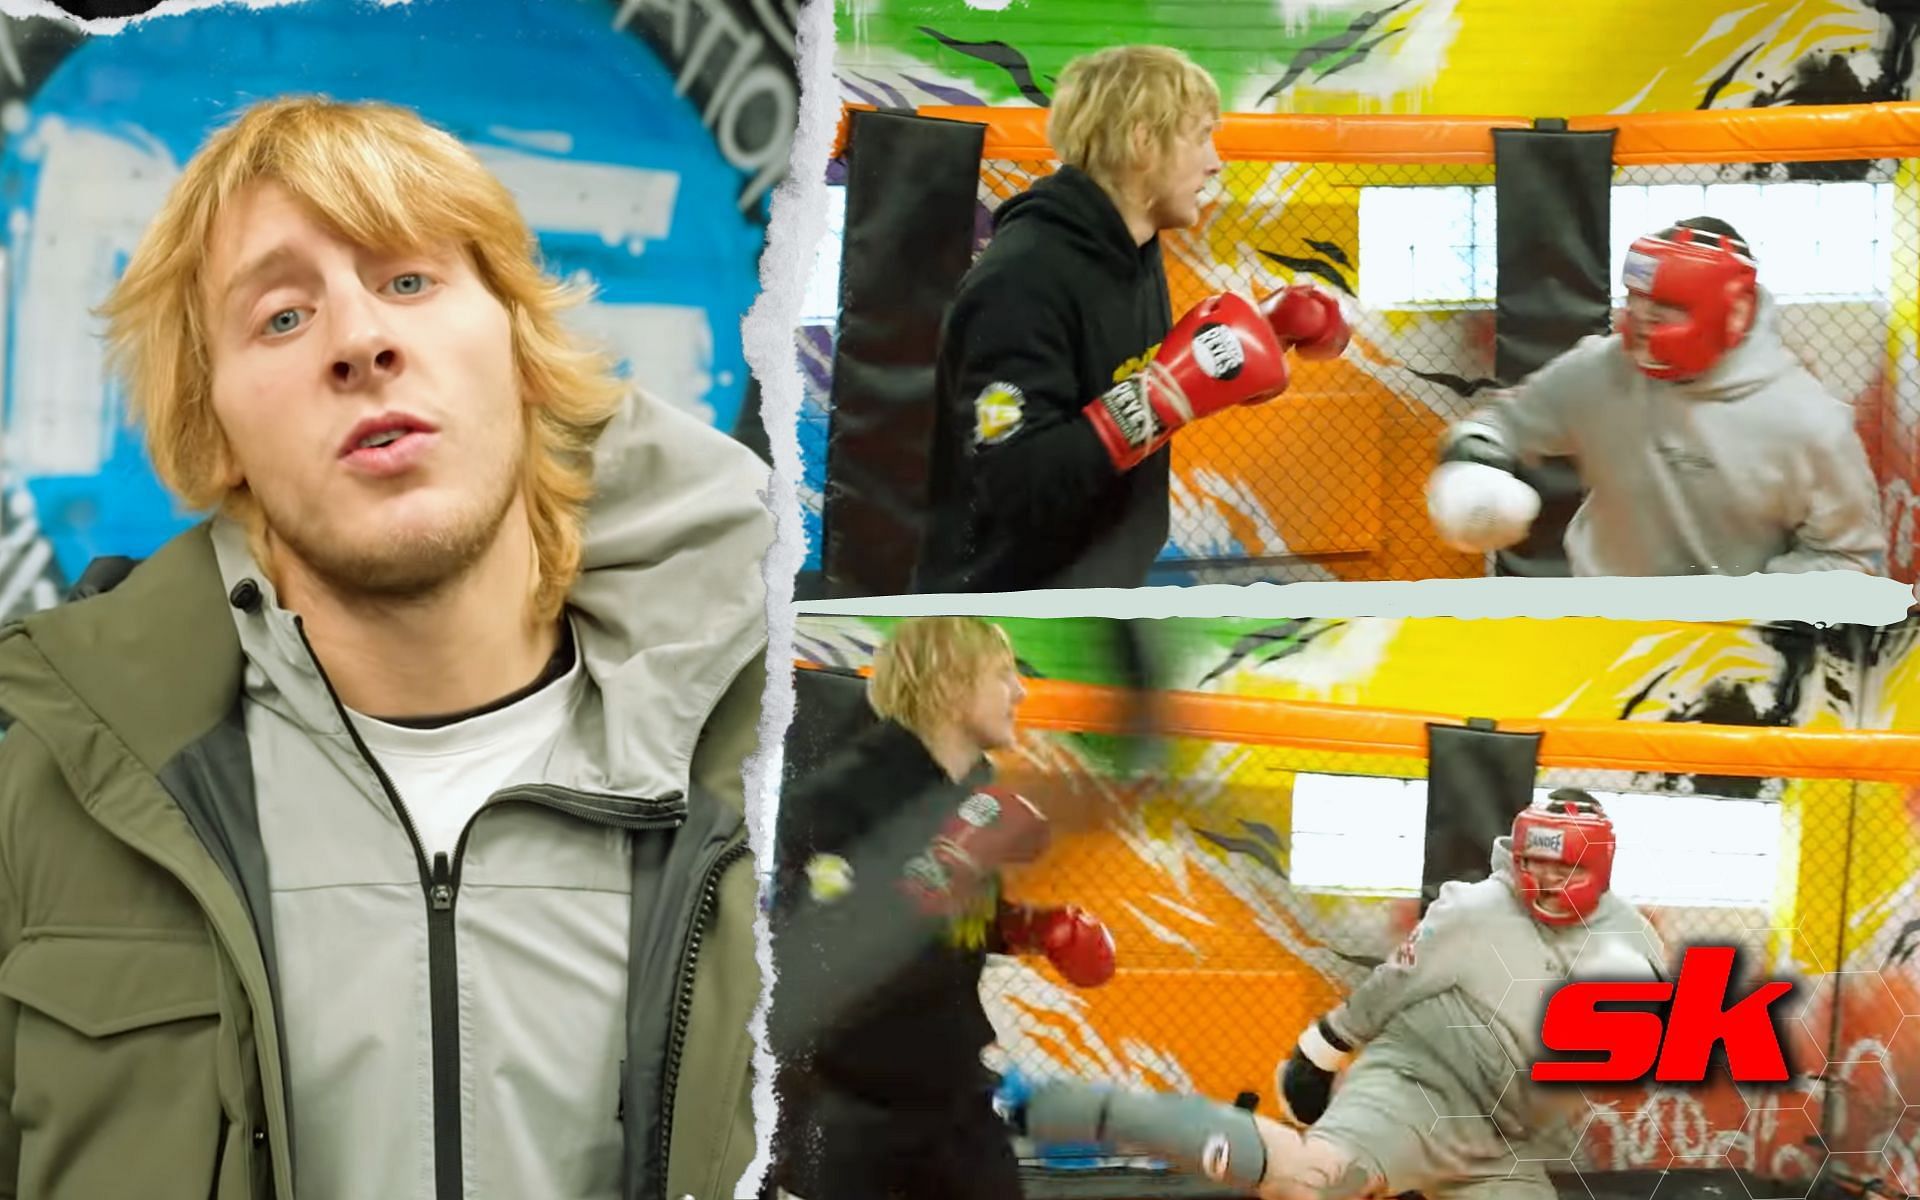 Paddy Pimblett explains why he respects the internet troll he beat up. [Image credits: YouTube/PaddyTheBaddy]